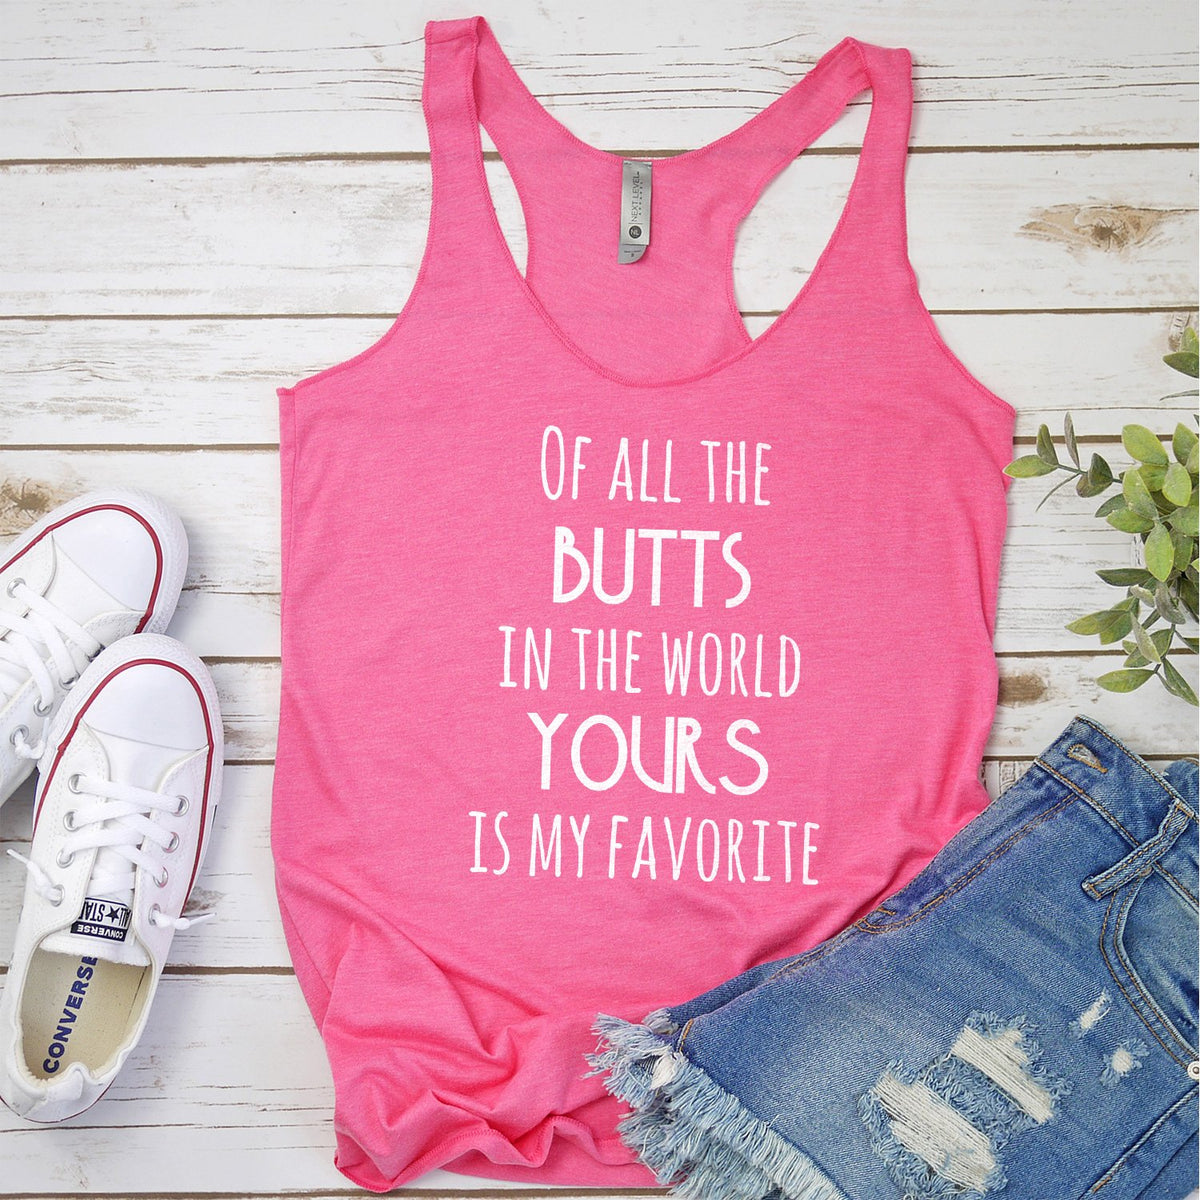 Off All the Butts in the World Yours is My Favorite - Tank Top Racerback